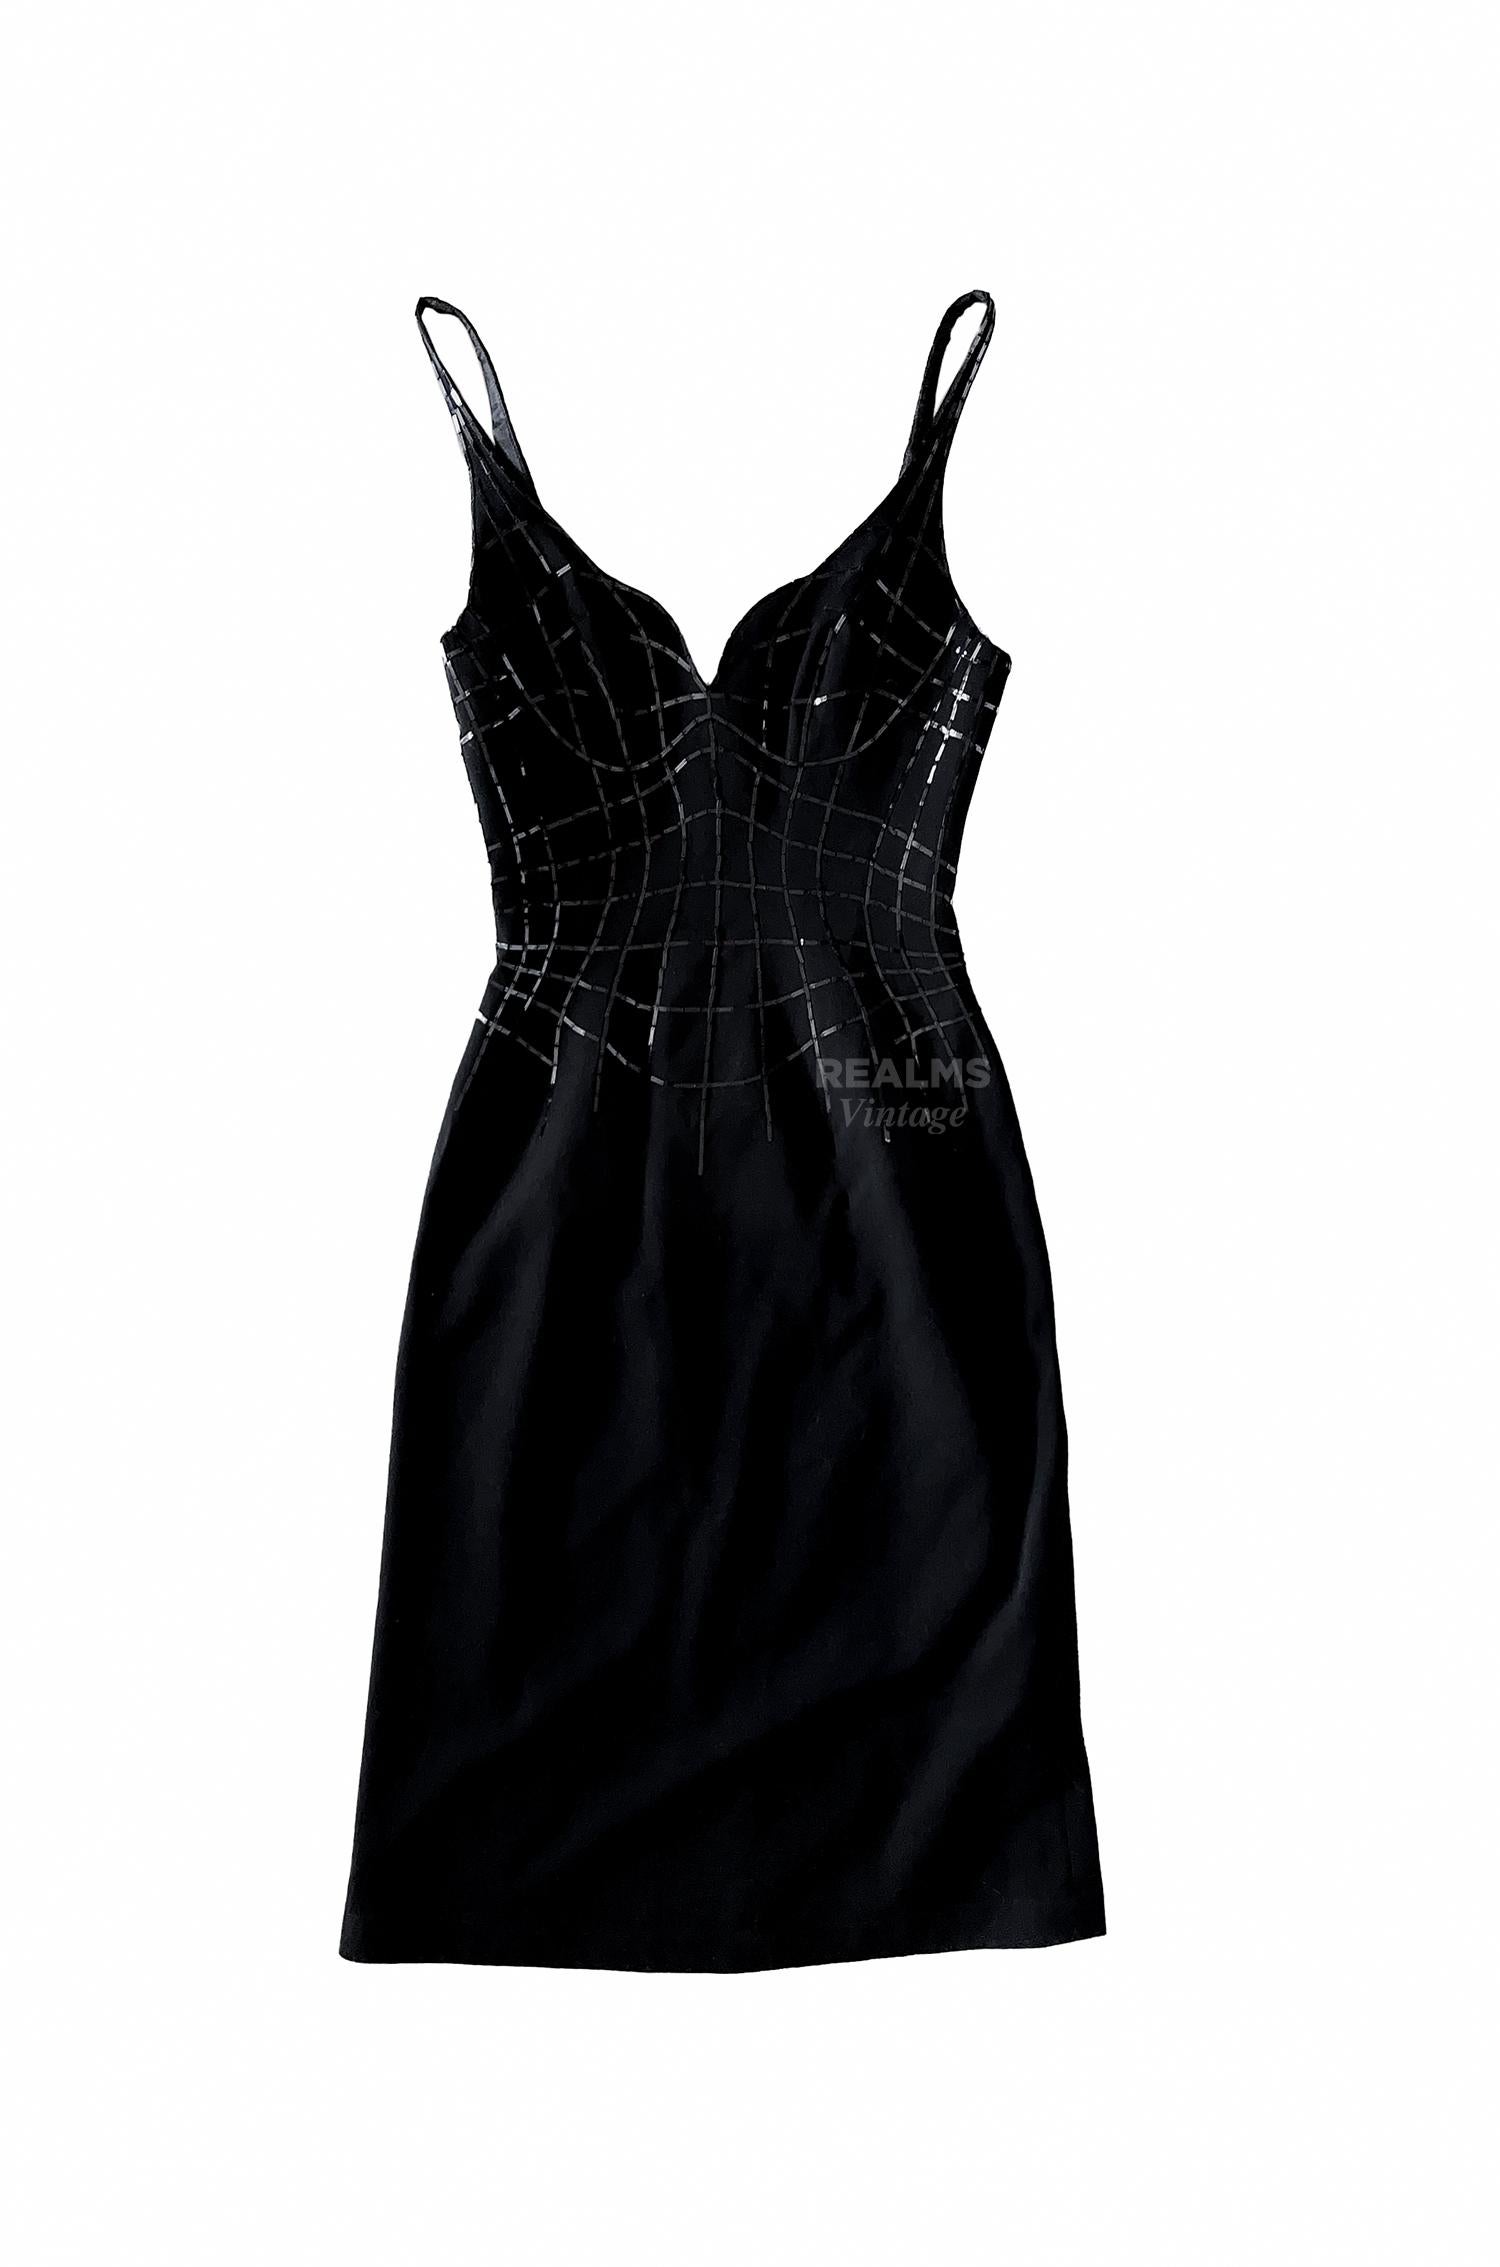 Thierry Mugler Couture Evening Dress Iconic Black Spider Web Anatomique Computer For Sale 4